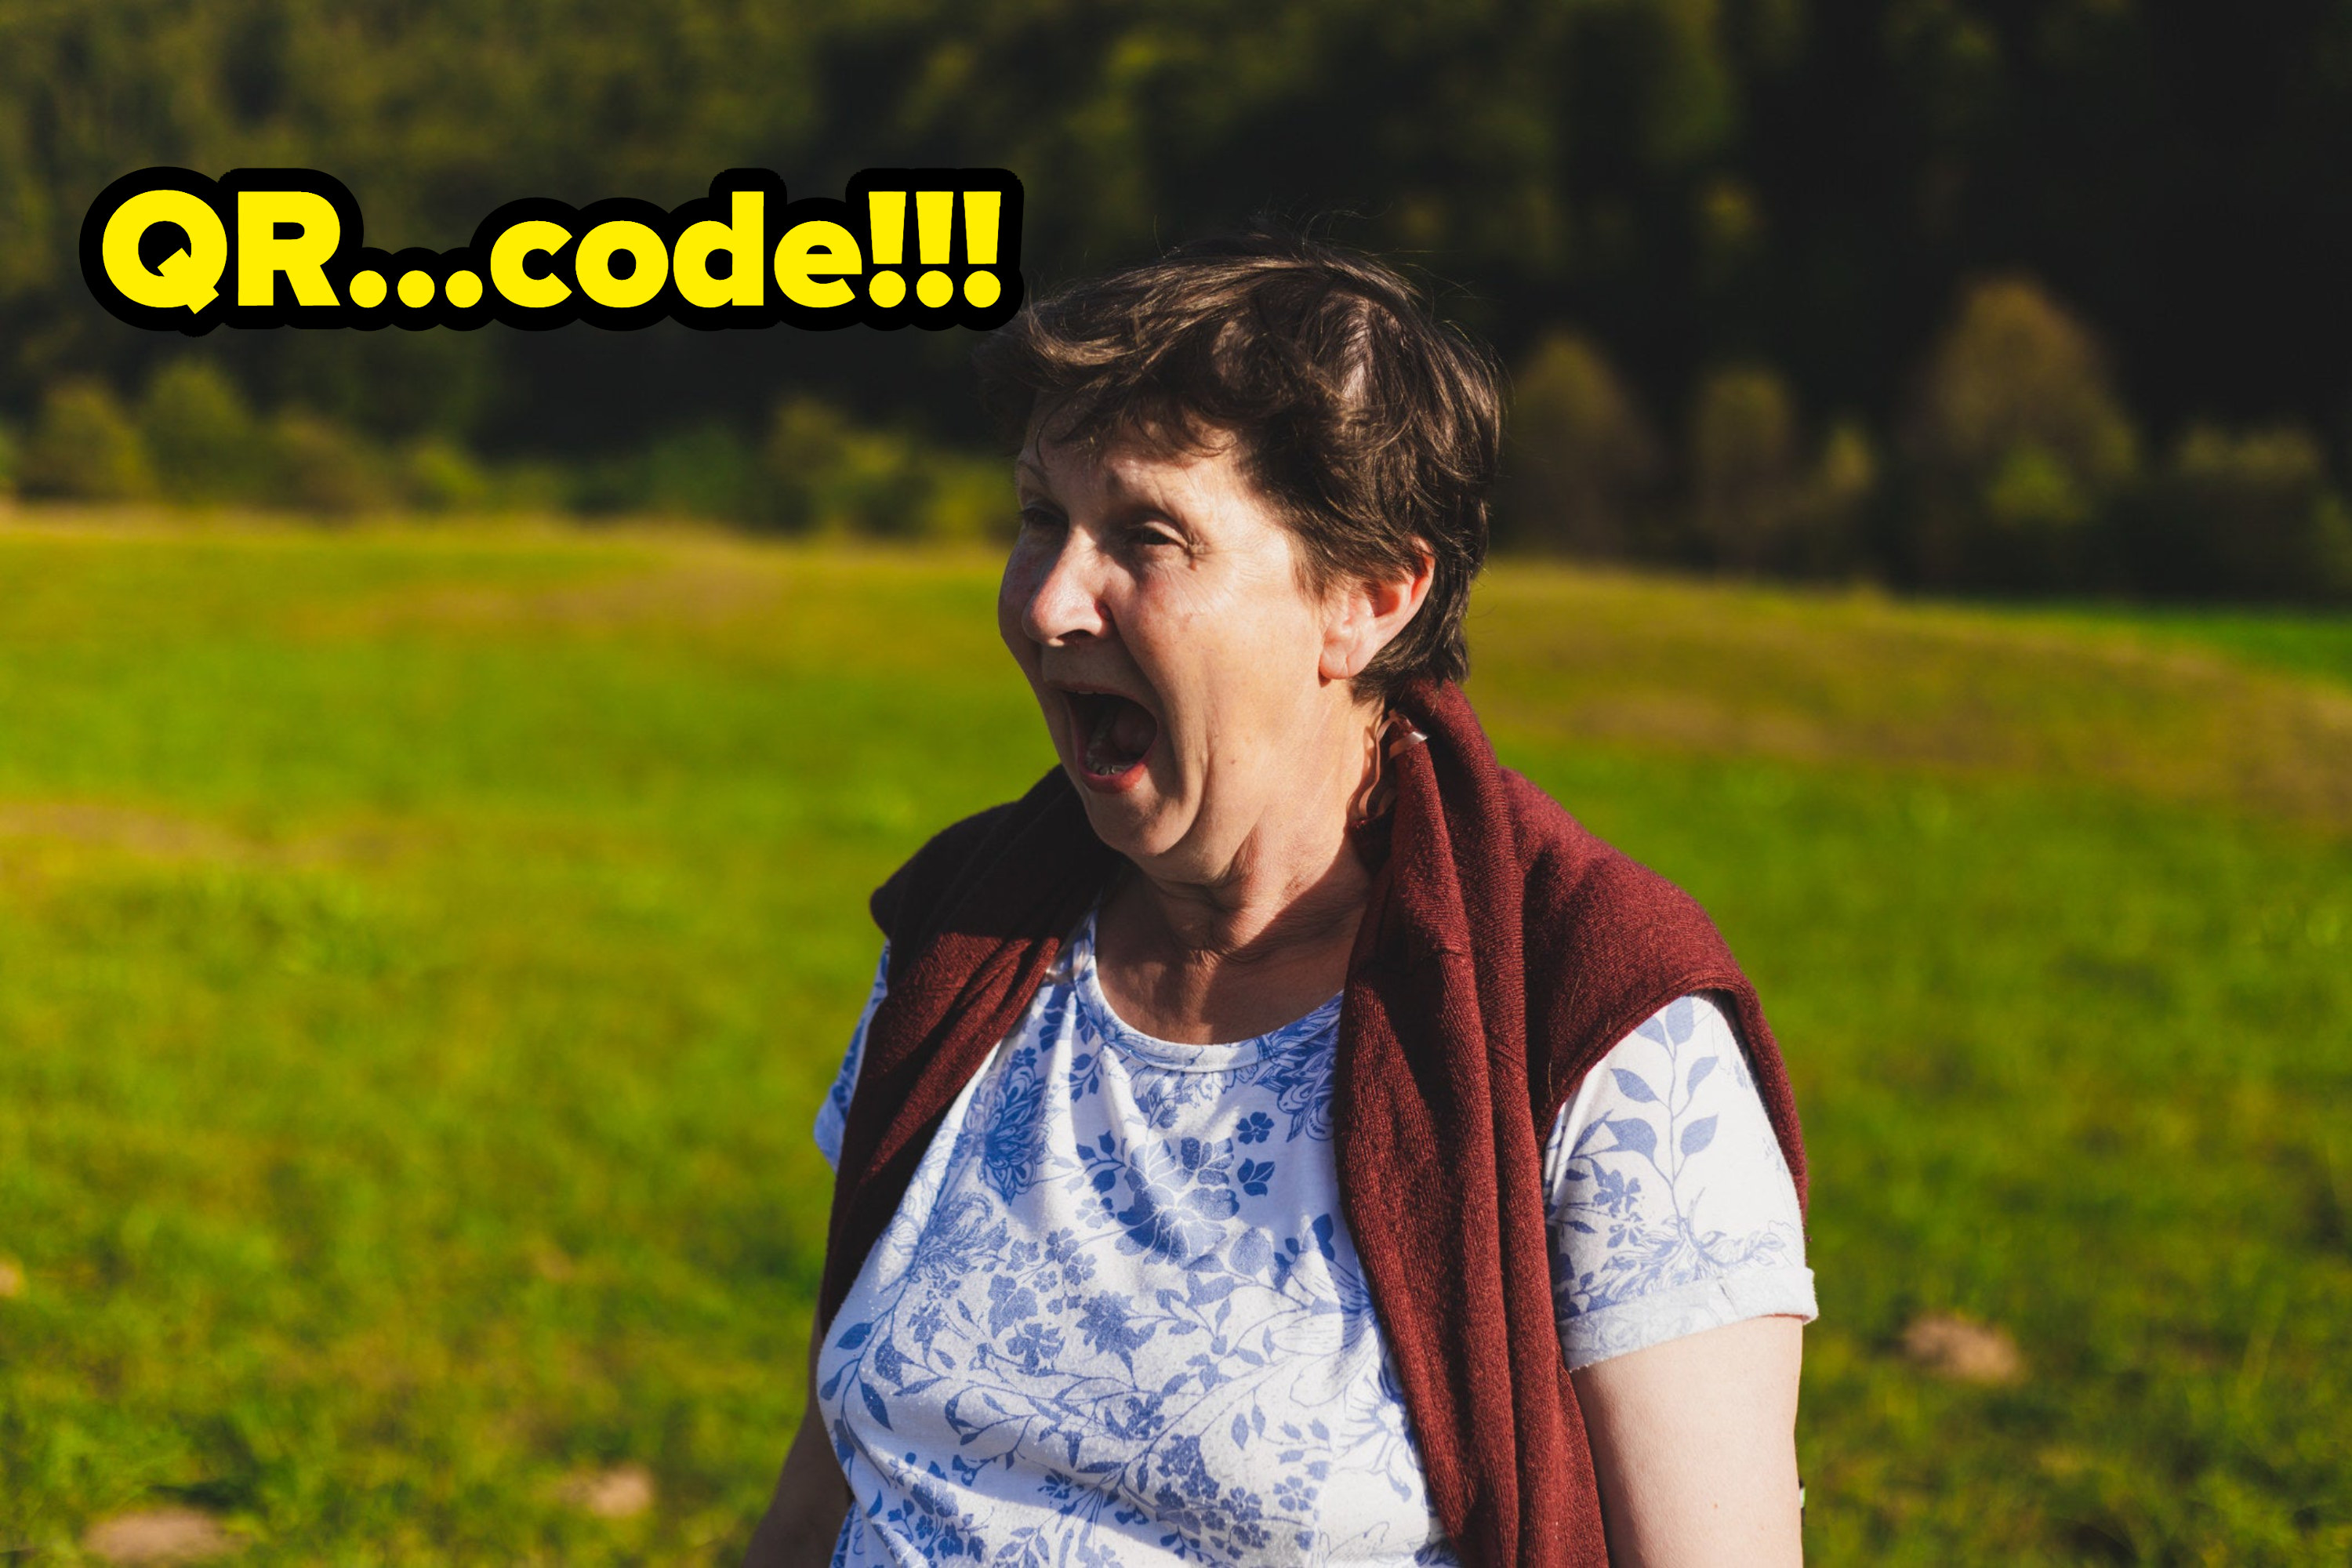 an older woman yelling qr code